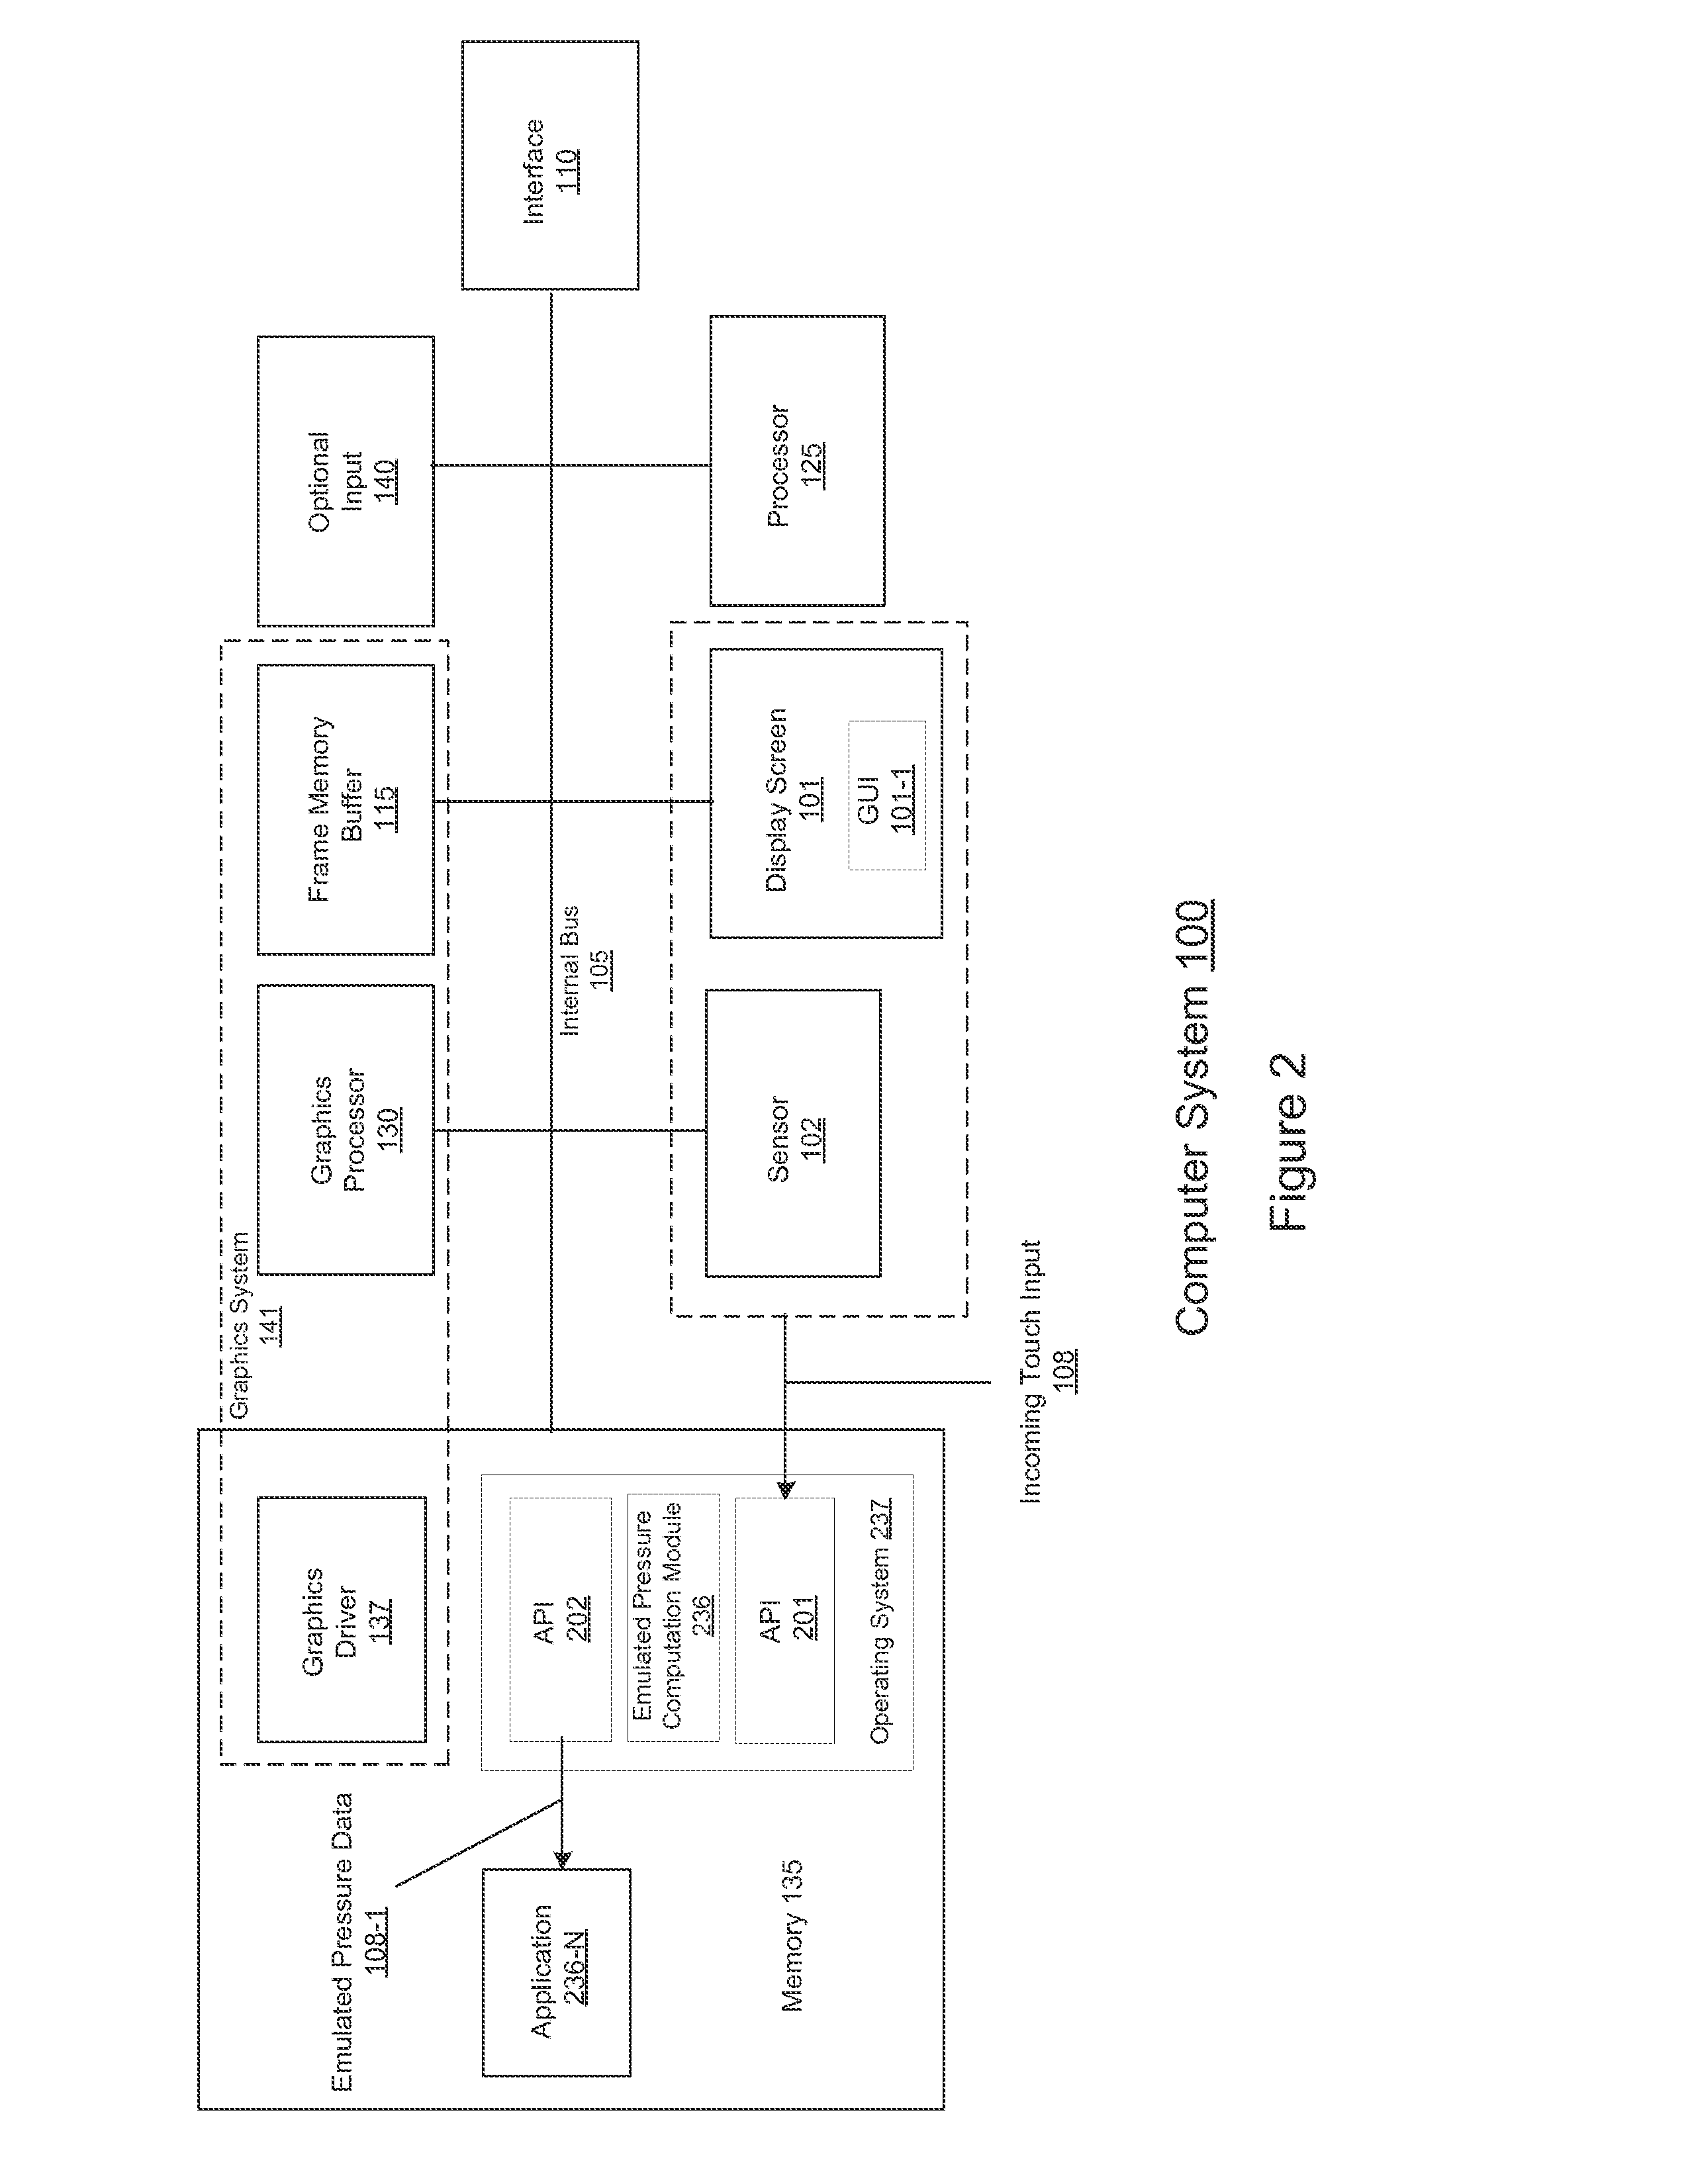 Method and system of emulating pressure sensitivity on a surface